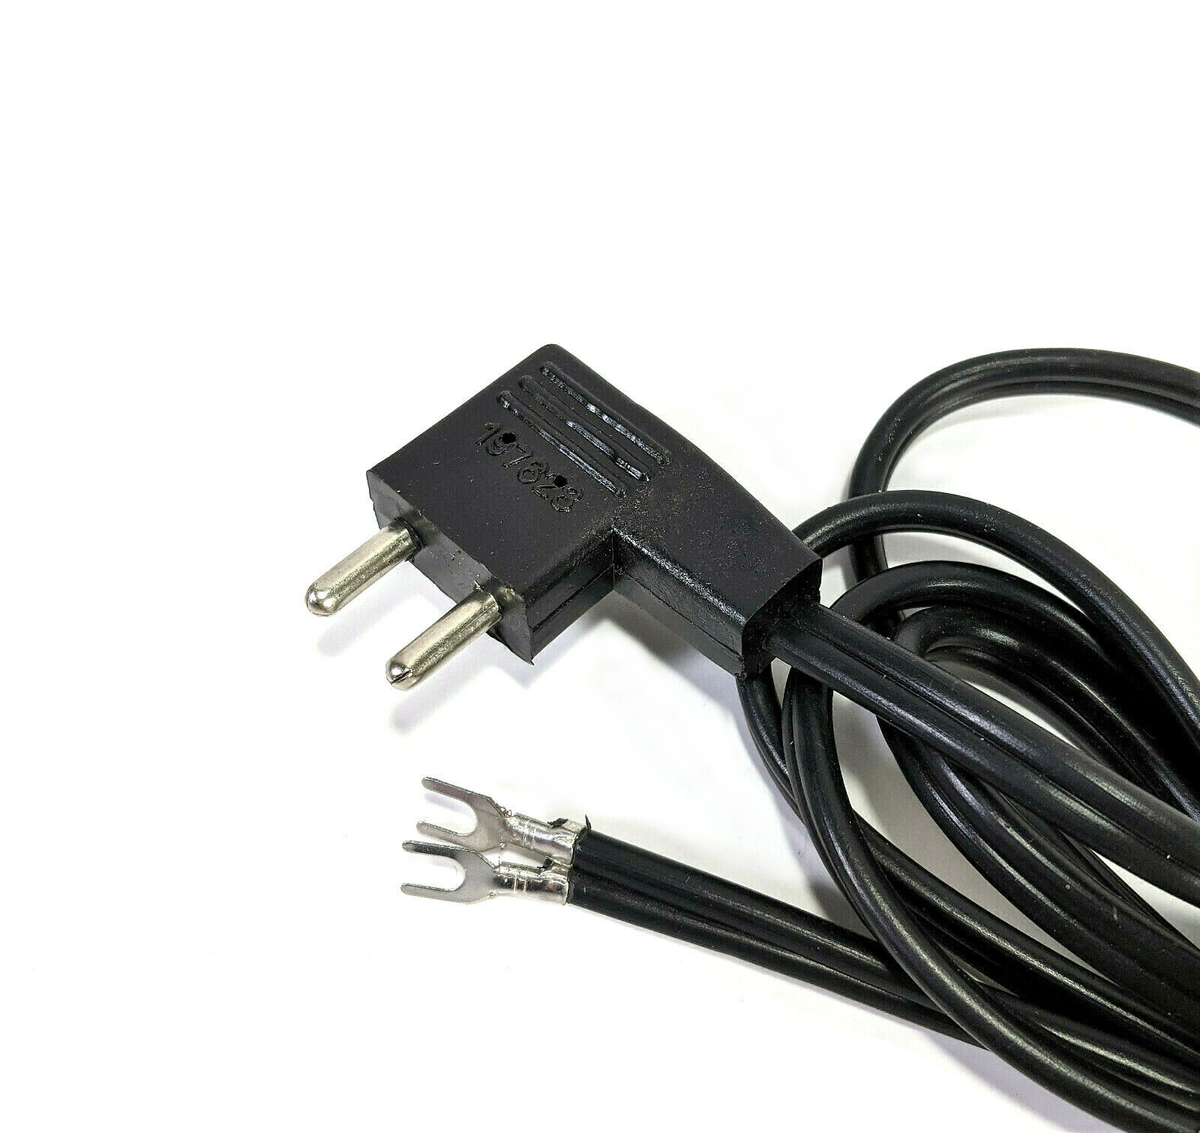 Power Cord, Single-Lead, for Singer 301, 400 Series, and others